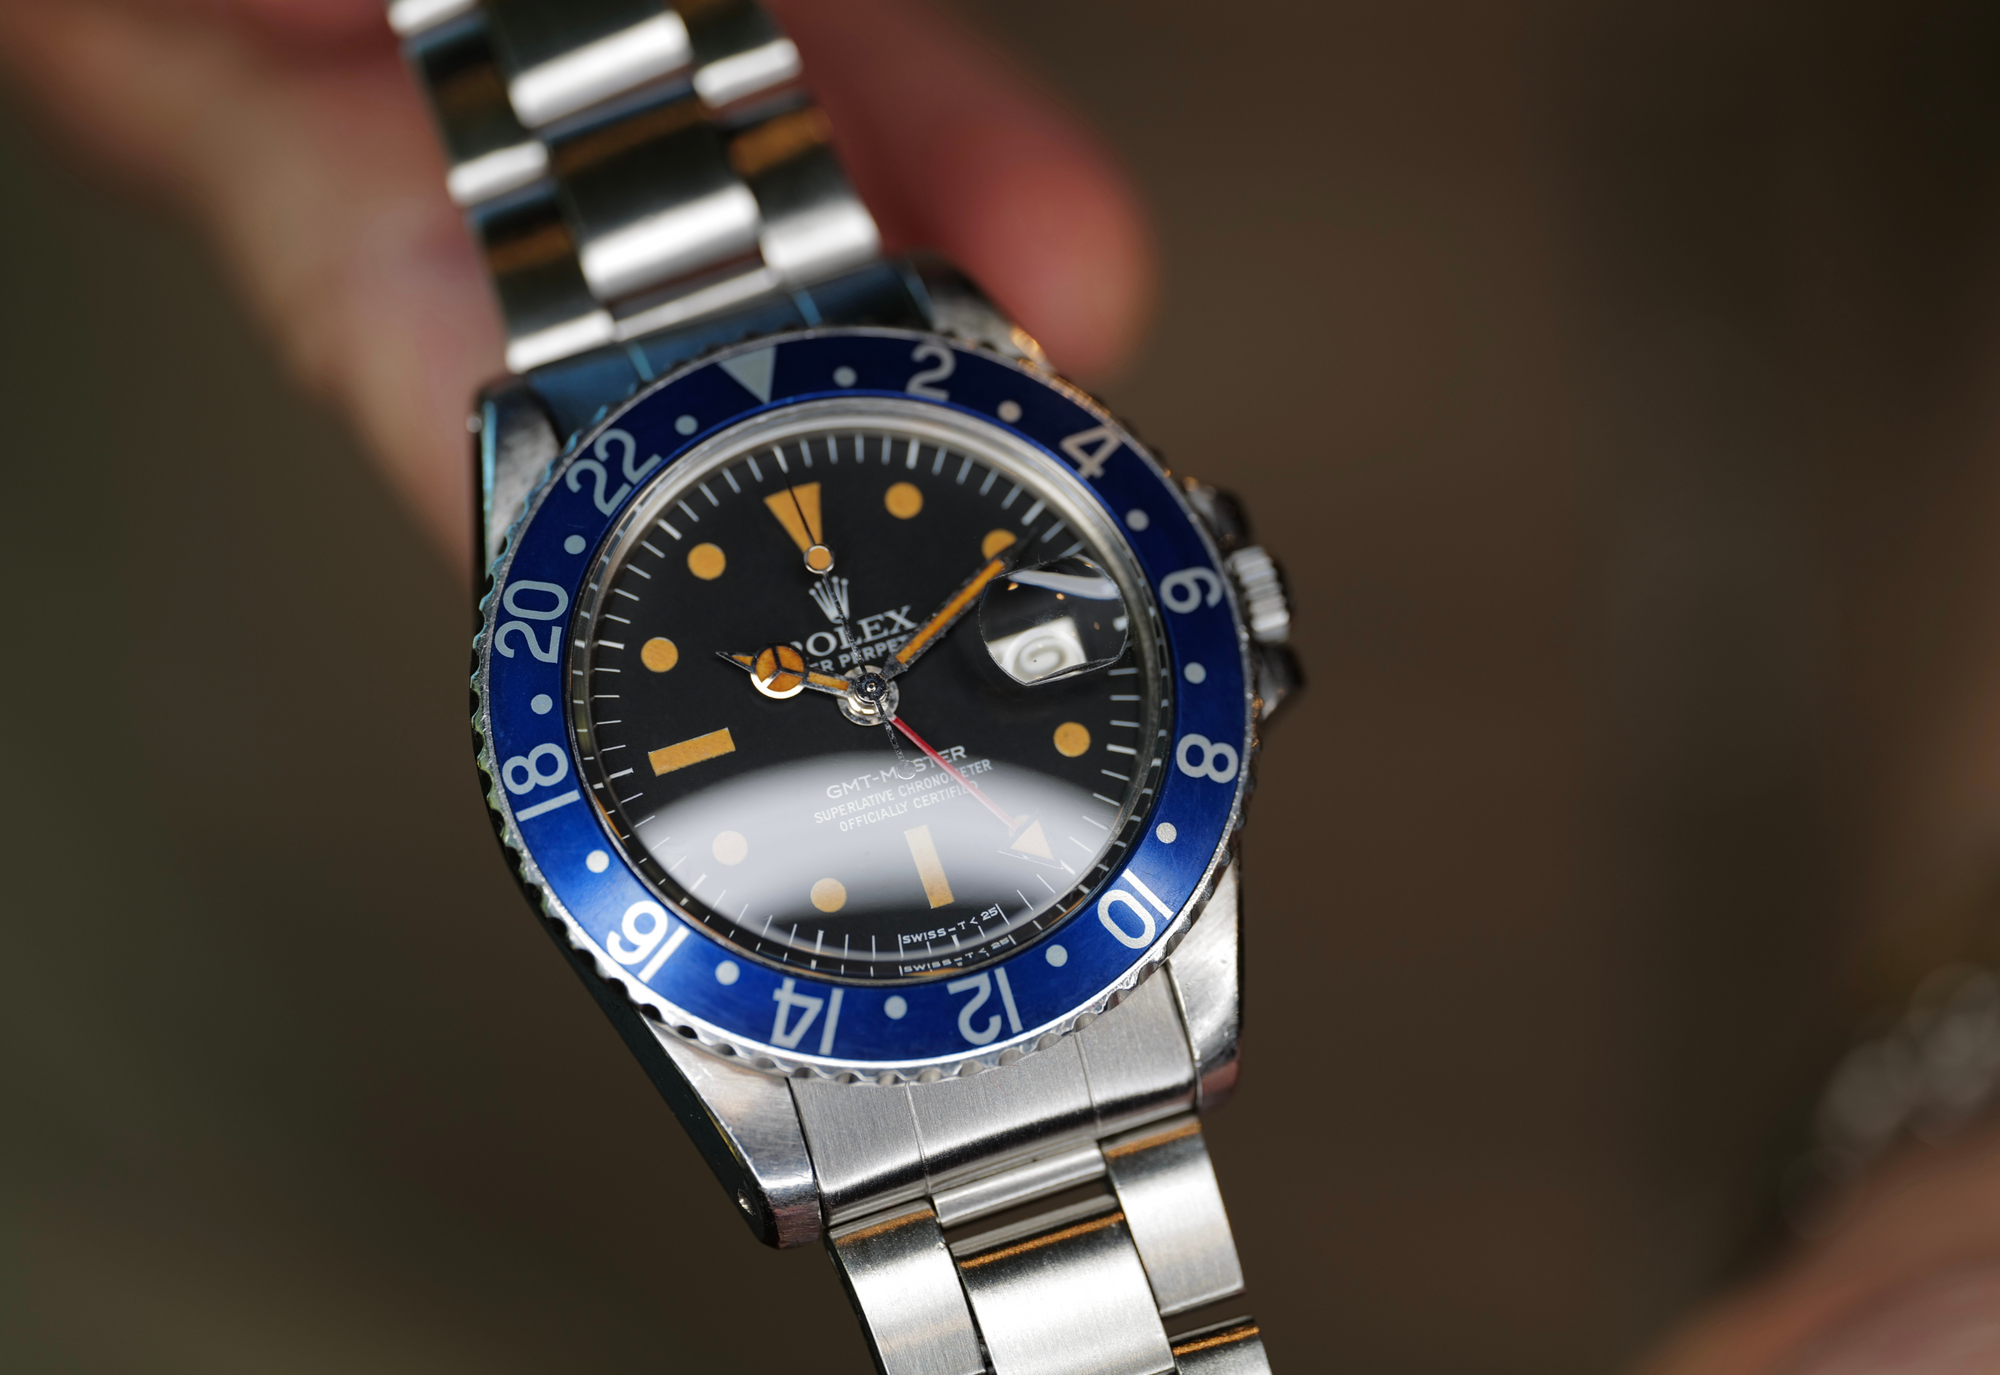 The Blueberriest GMT from all angles